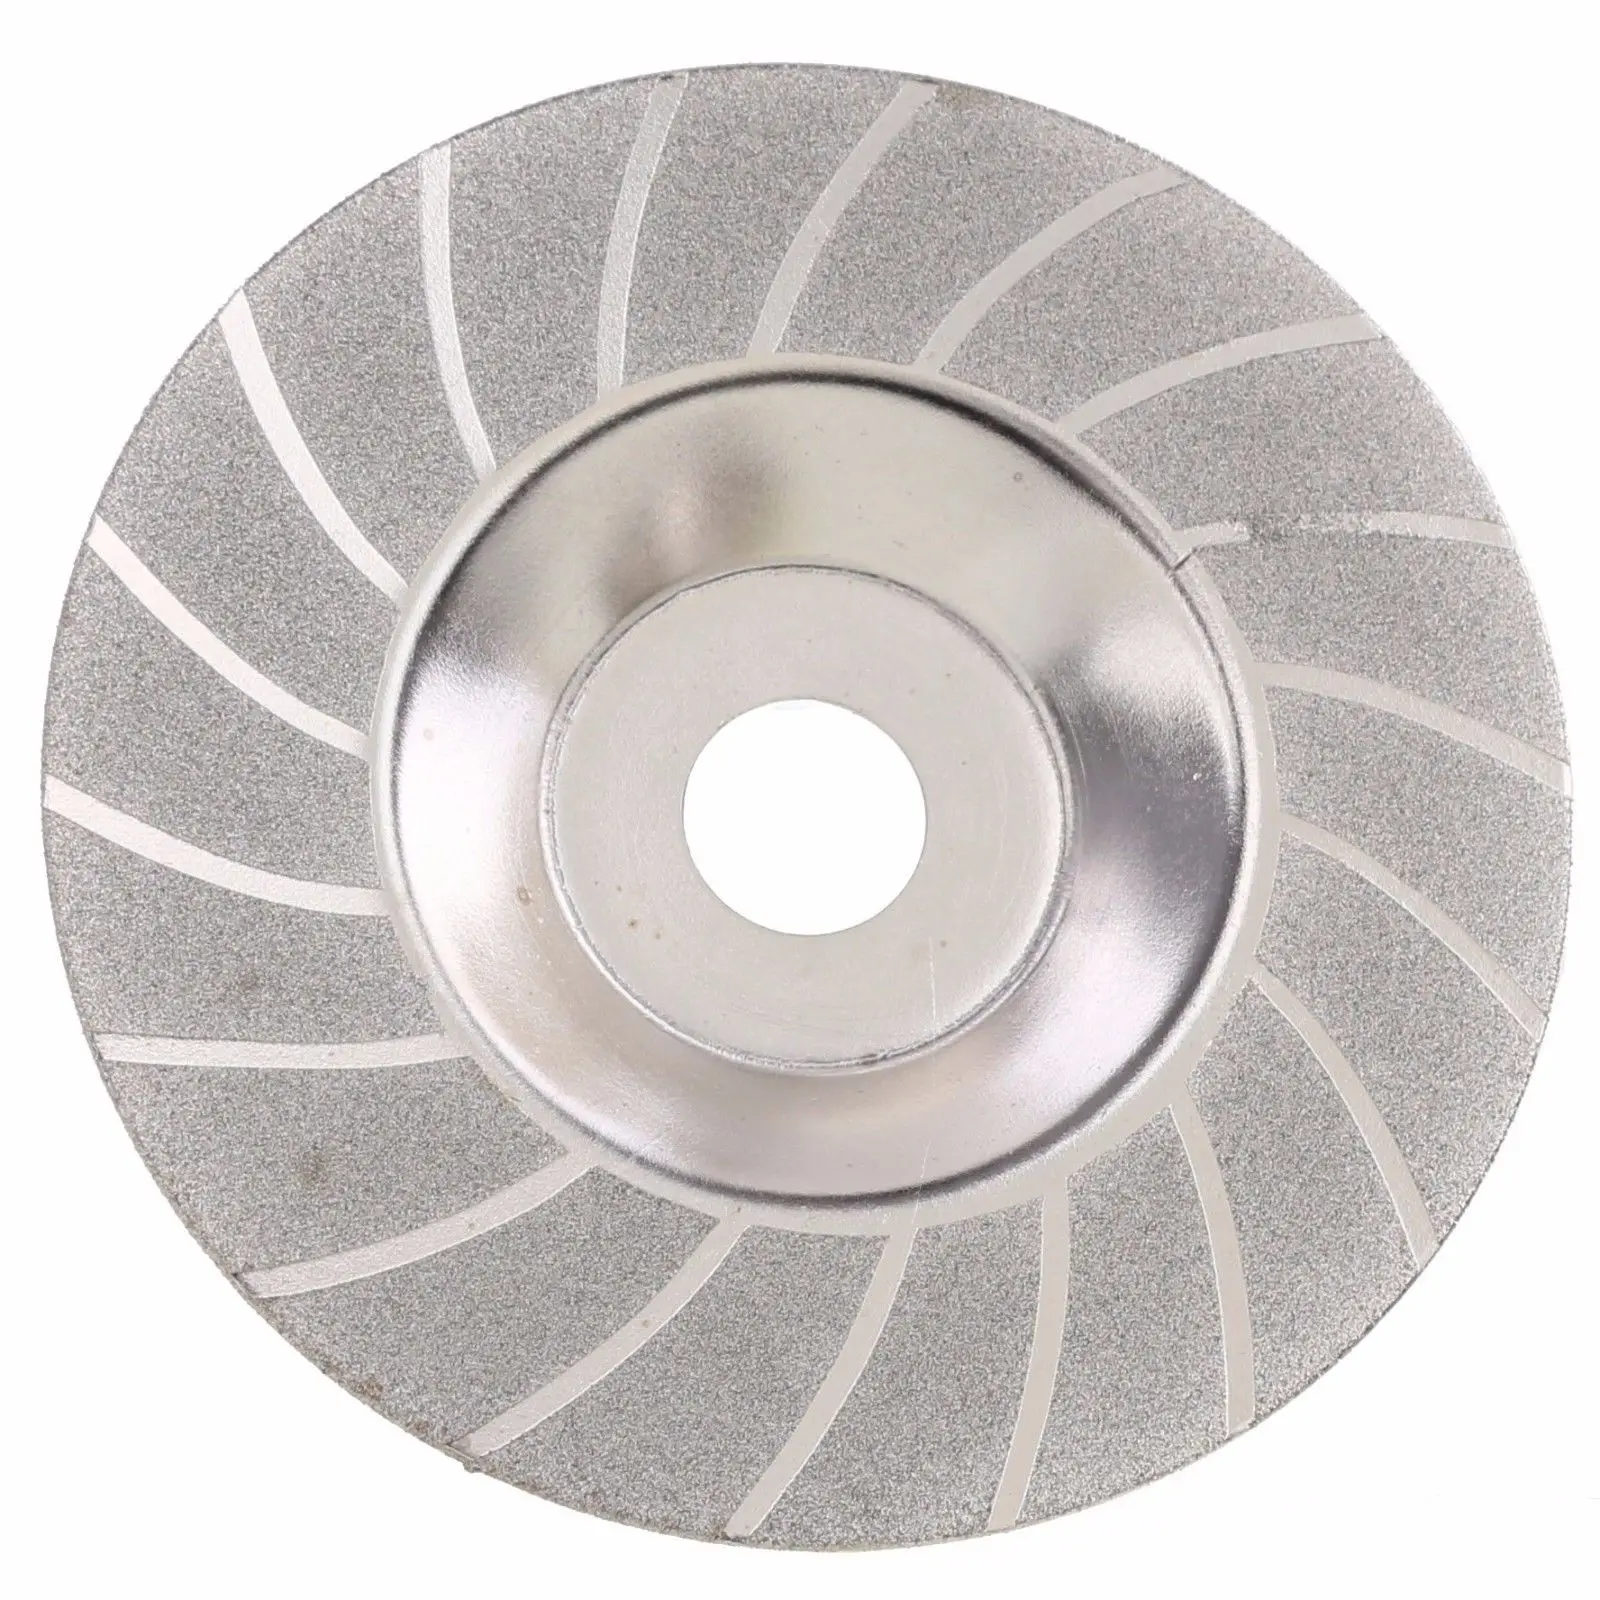 2Pcs Diamond Coated Grinding Disc Wheel 4" inch For Angle Grinder Grit 60 